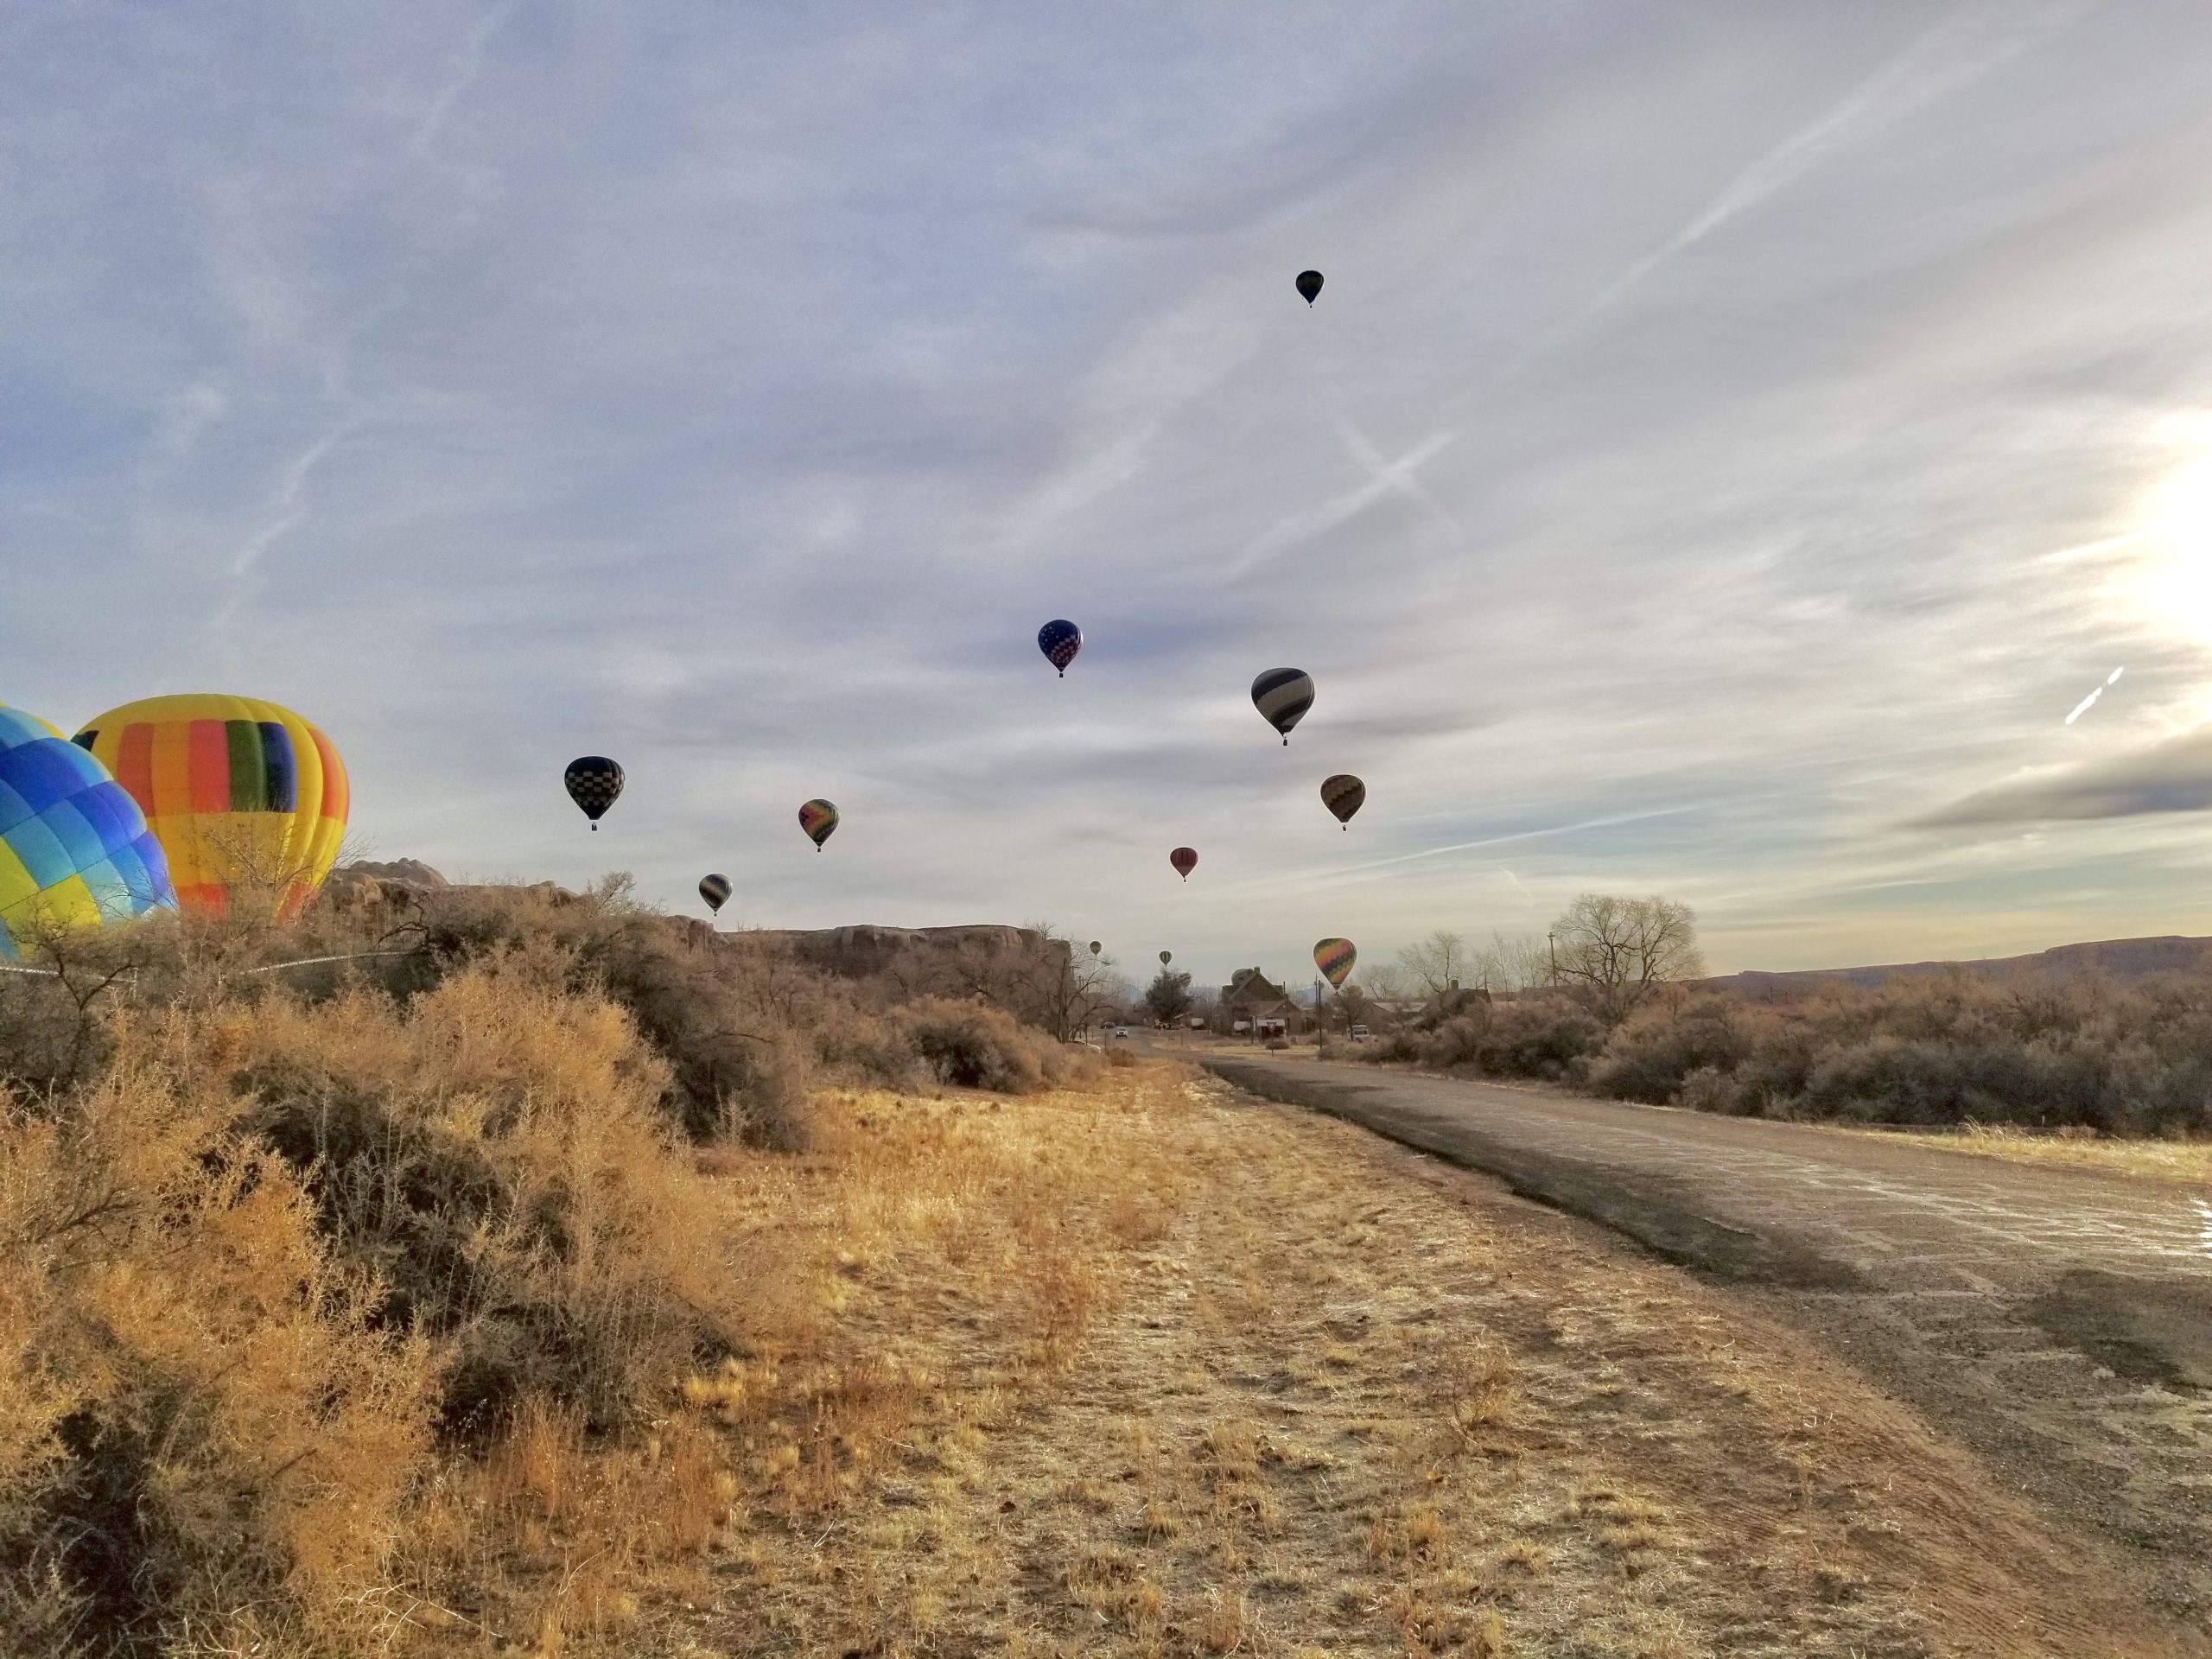 Wonders abound at the Bluff Balloon Festival Moab Sun News